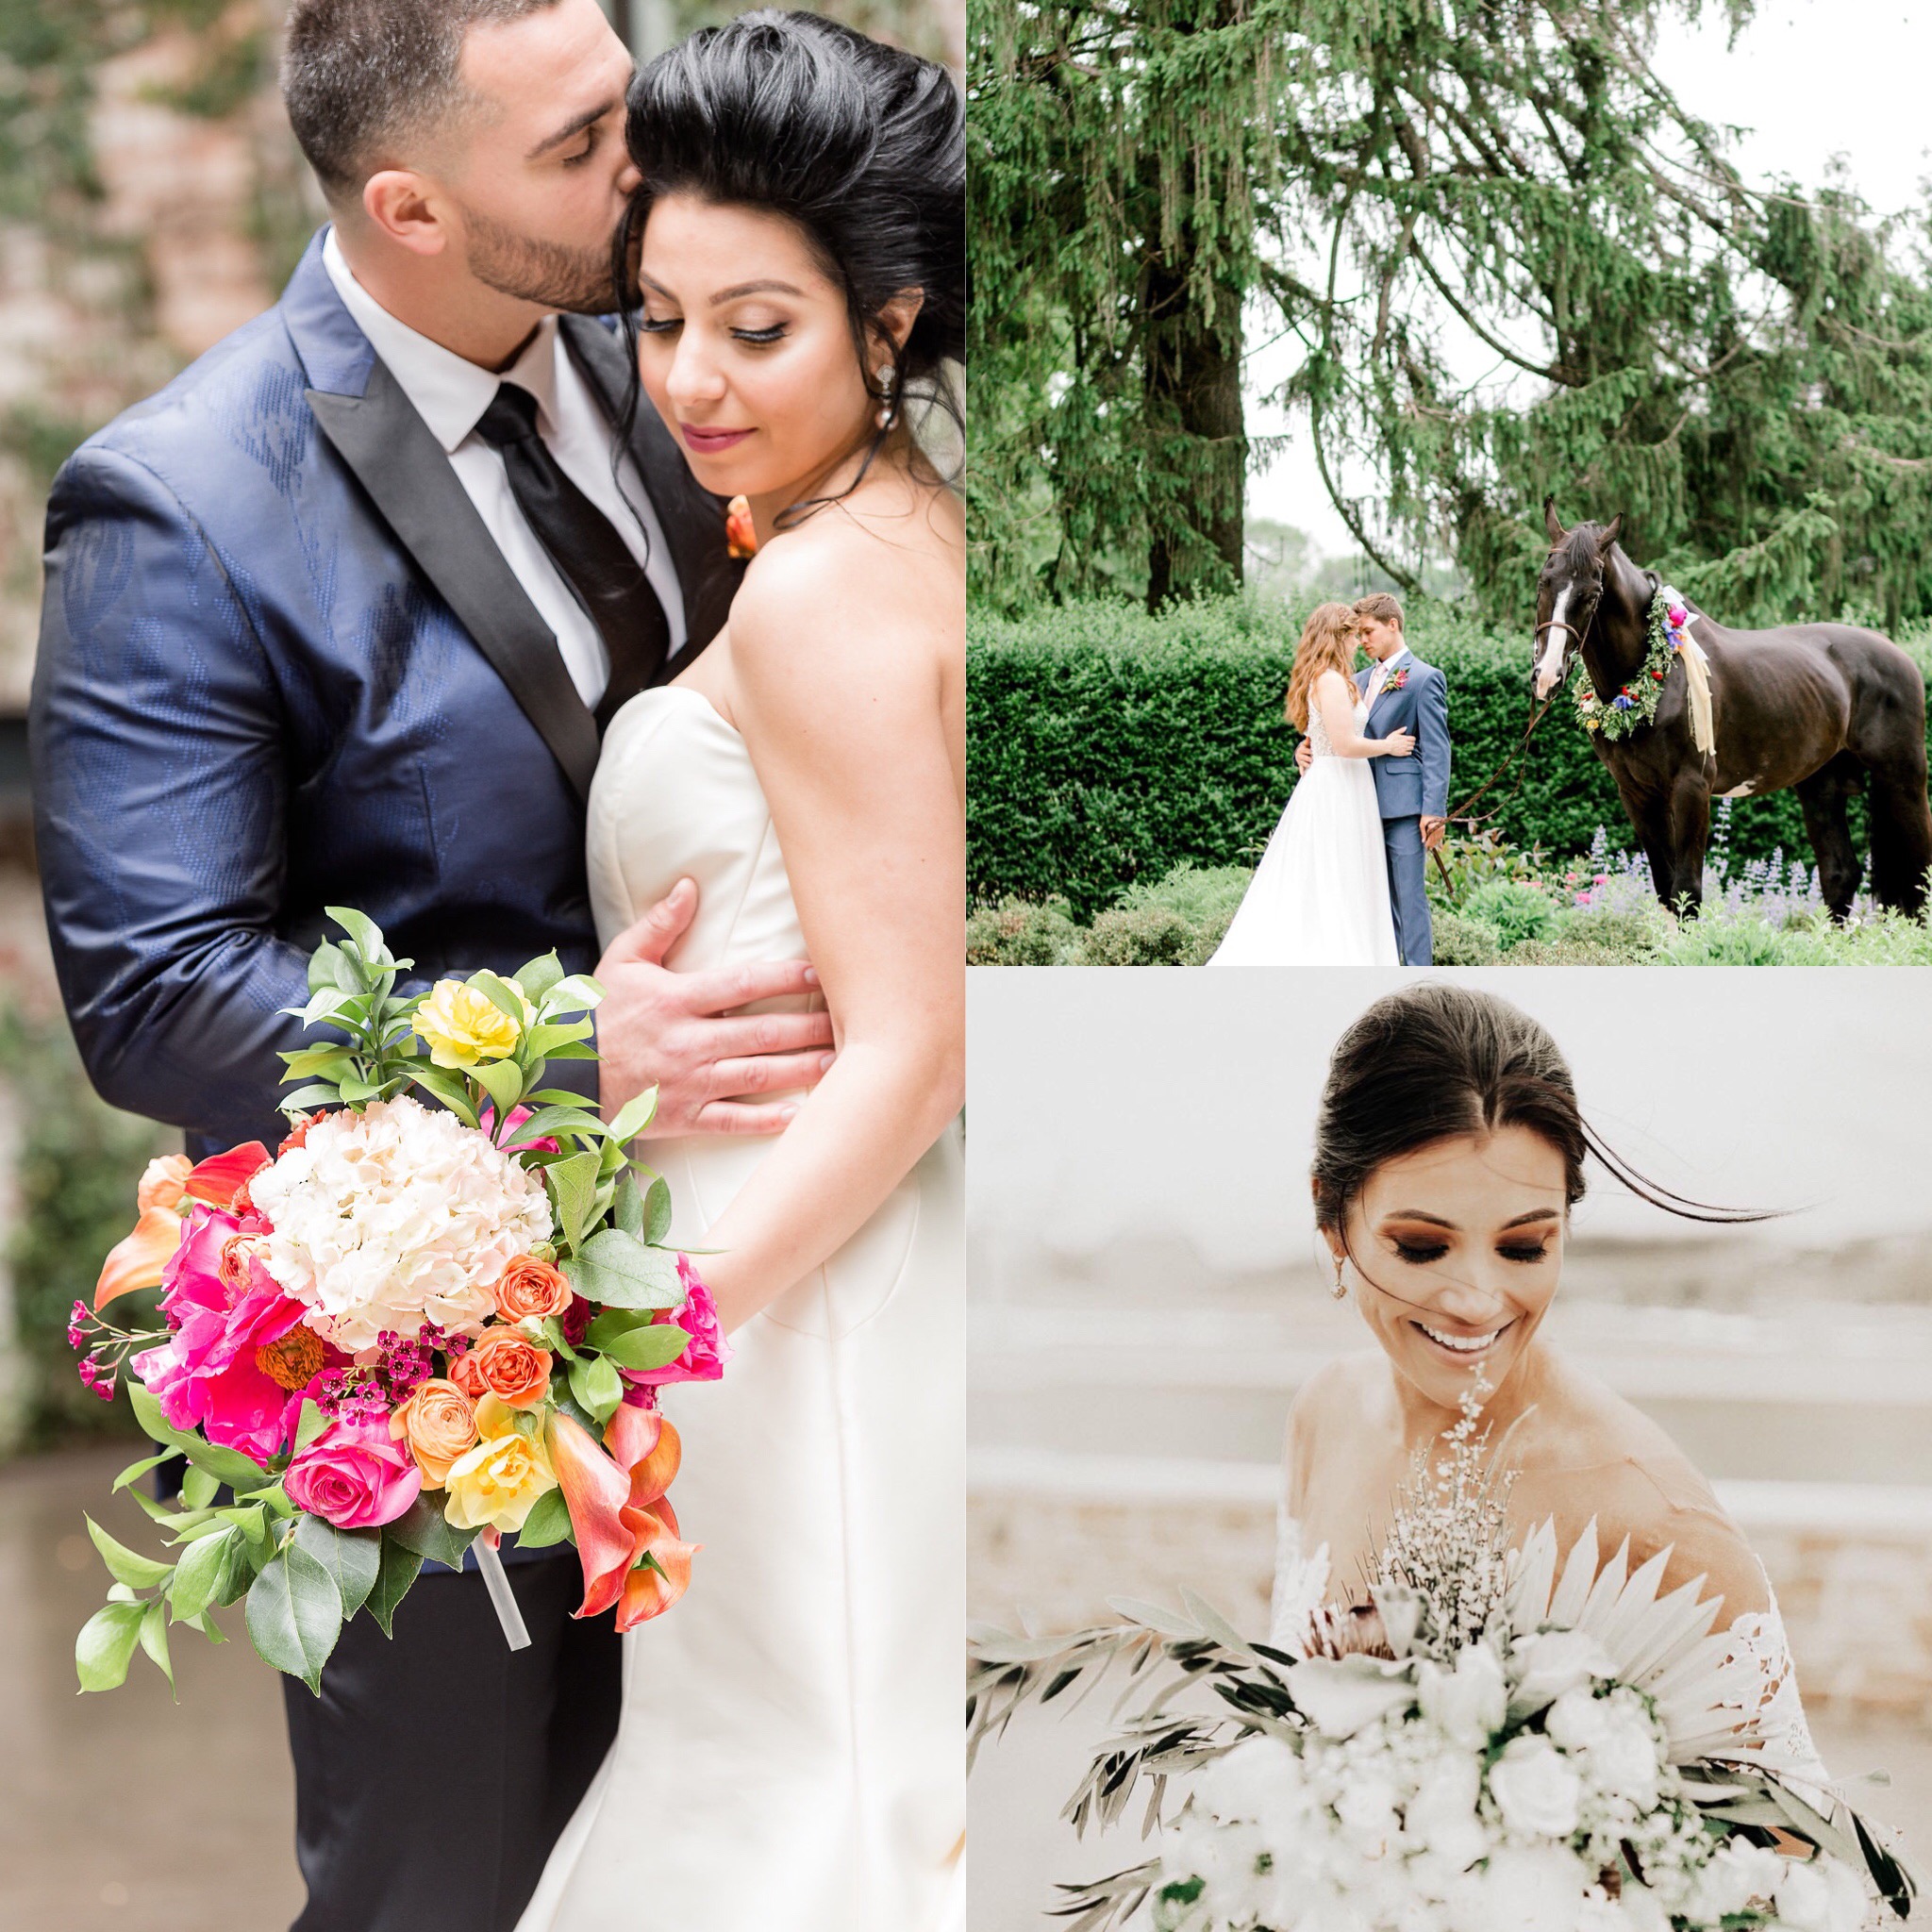 Styled Shoots Across America, Styled Shoots, Wedding Photography 